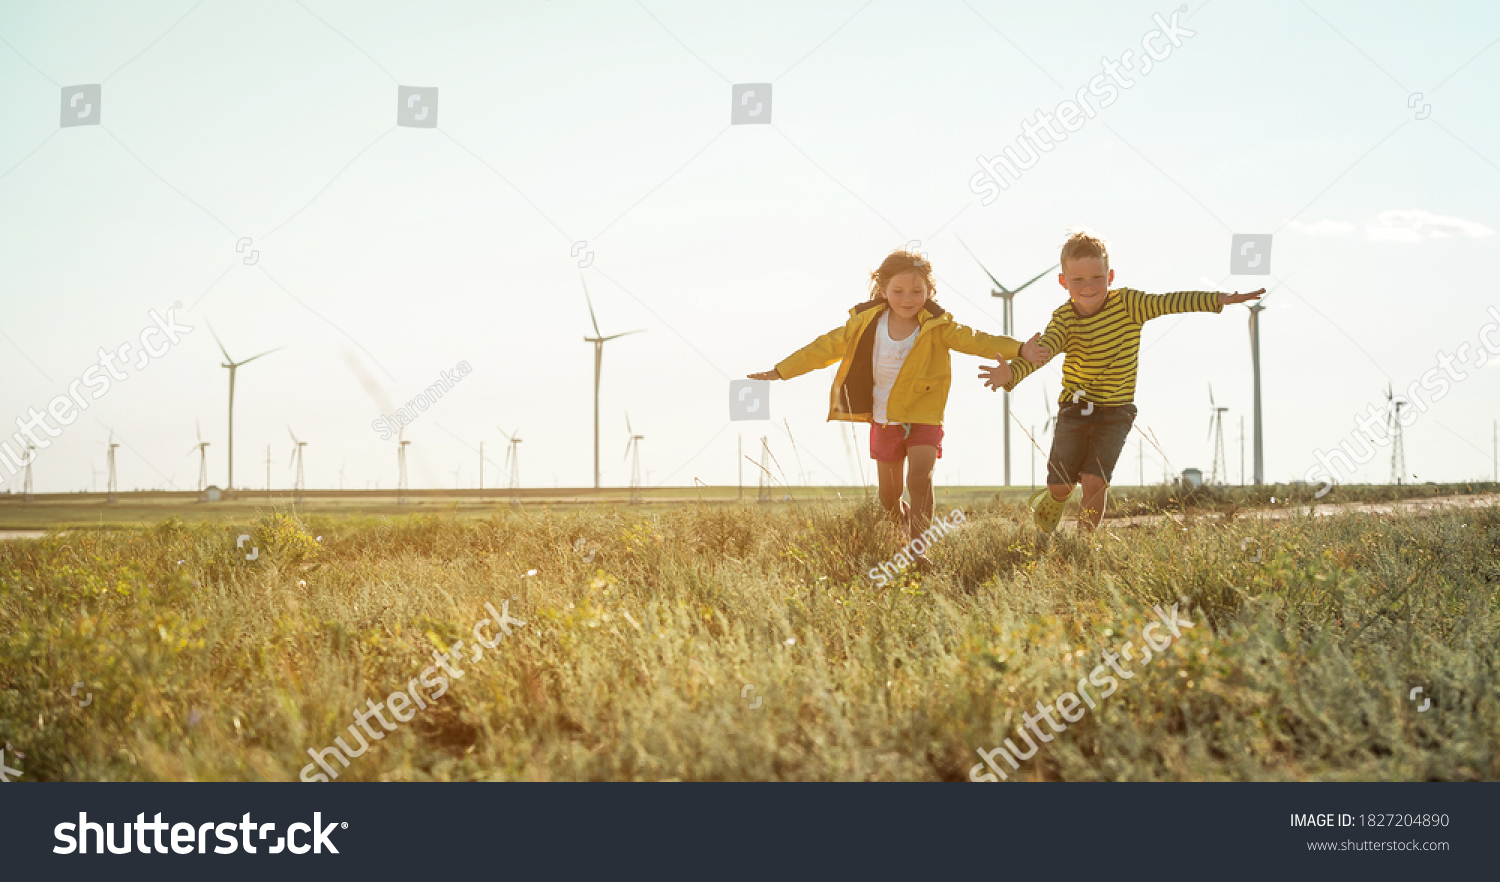 Little girl and boy are running in front of windmills. Renewable energies and sustainable resources - wind mills. children playing with the wind near a wind turbine #1827204890